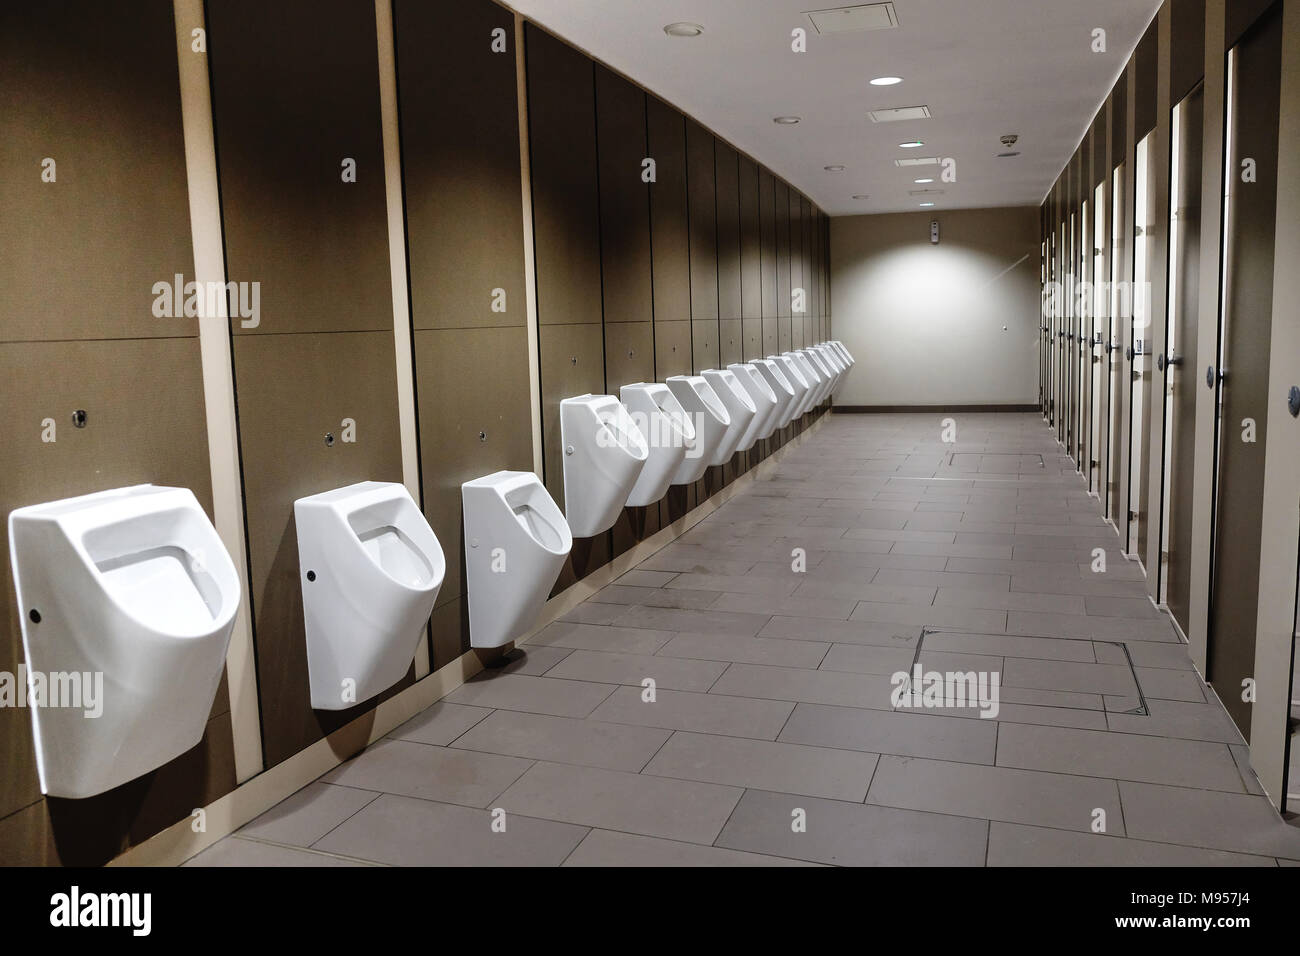 Urinals, at a motorway service station Stock Photo